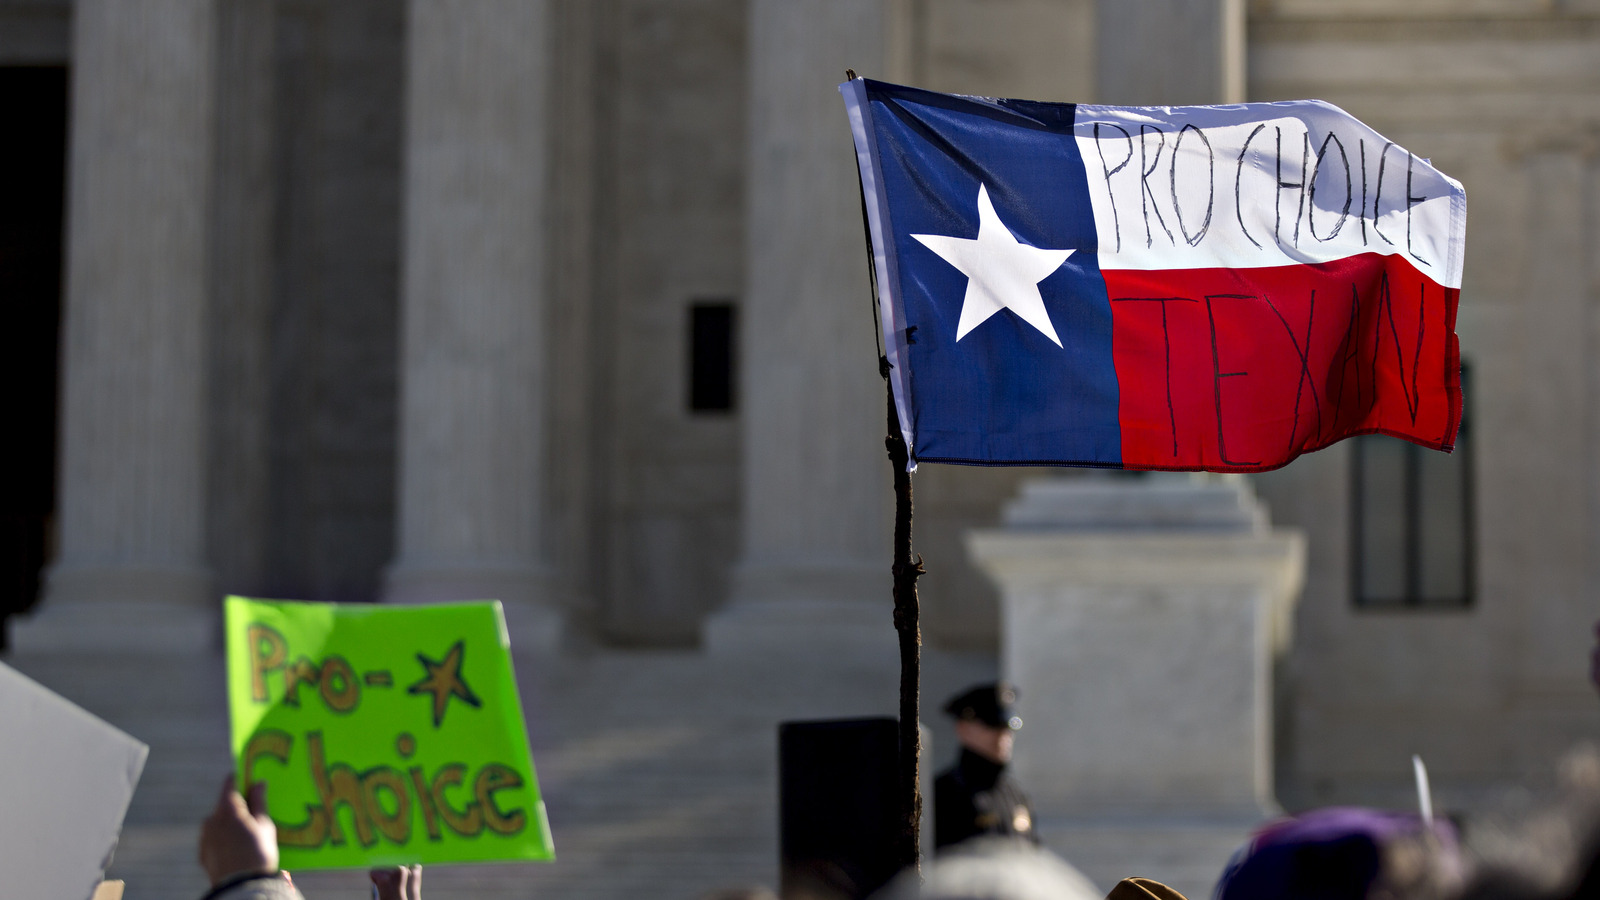 Legal Expert Explains Why The Supreme Court s Texas Ruling Isn t The